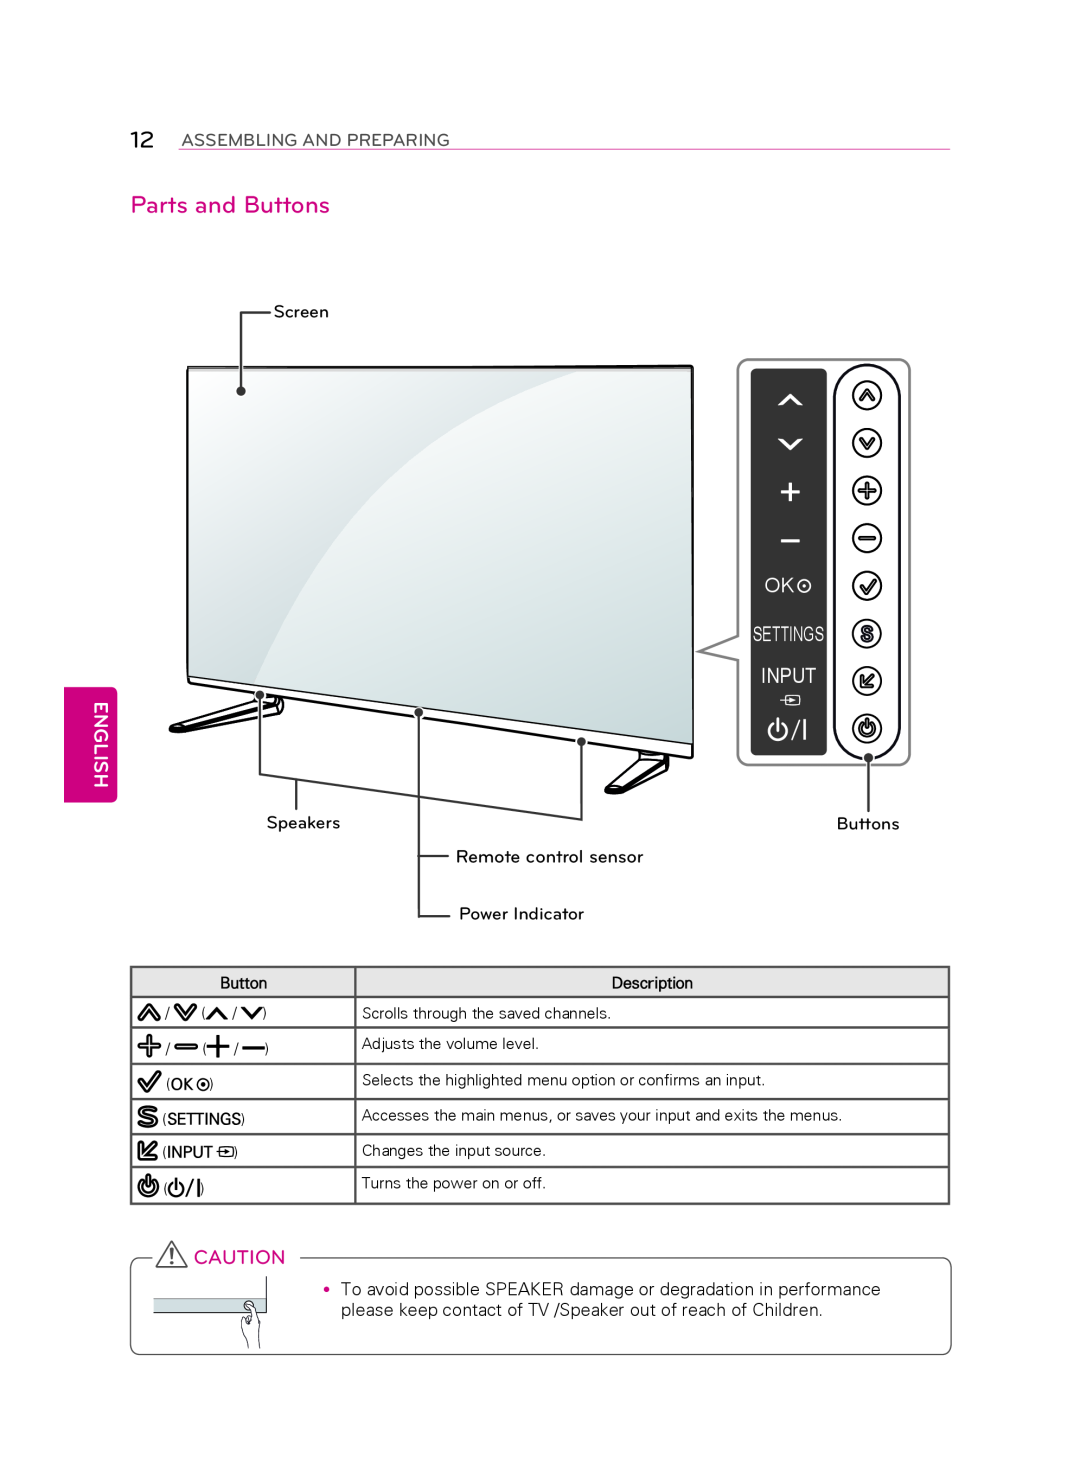 LG Electronics 55LA9650 owner manual Parts and Buttons, Ok Settings Input, English, Assembling And Preparing 